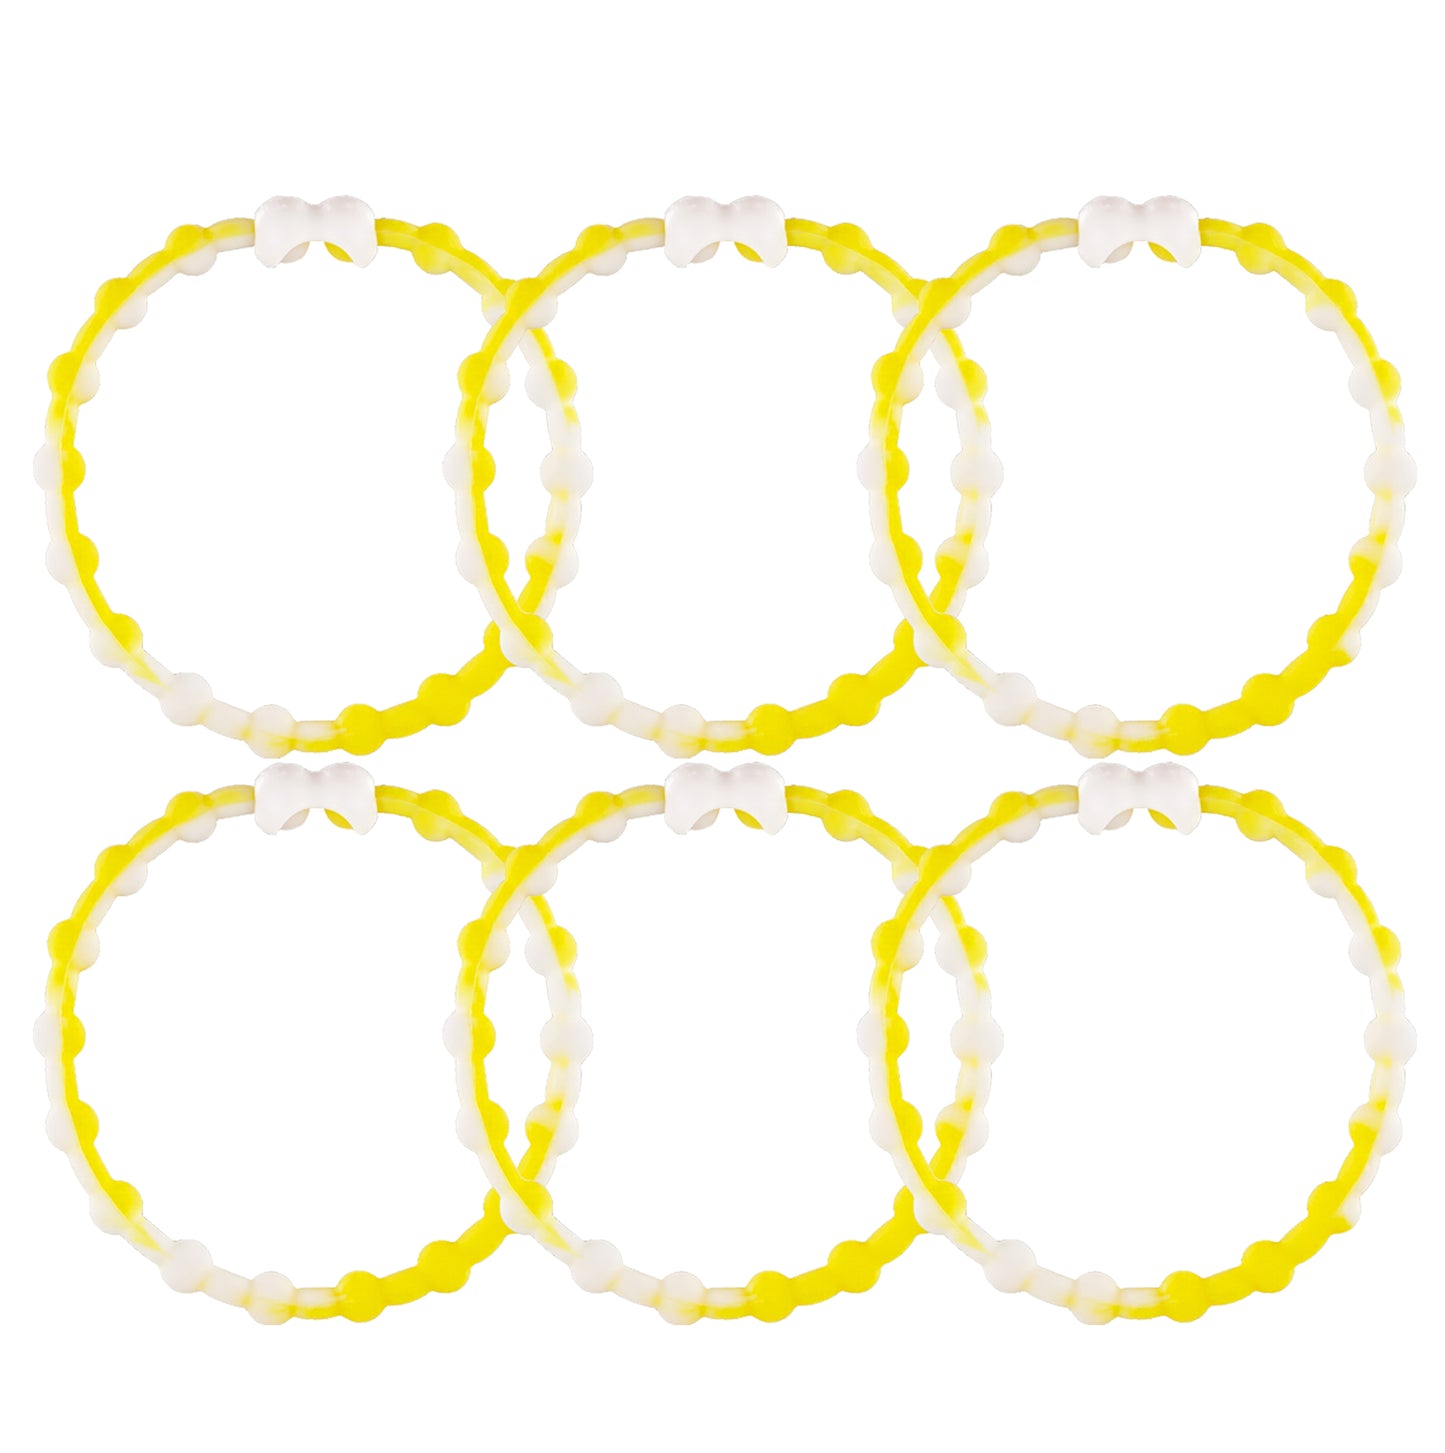 Sunshine & Clean Lines: White & Yellow Hair Ties (6-Pack) - A Pop of Cheer for Every Hairstyle